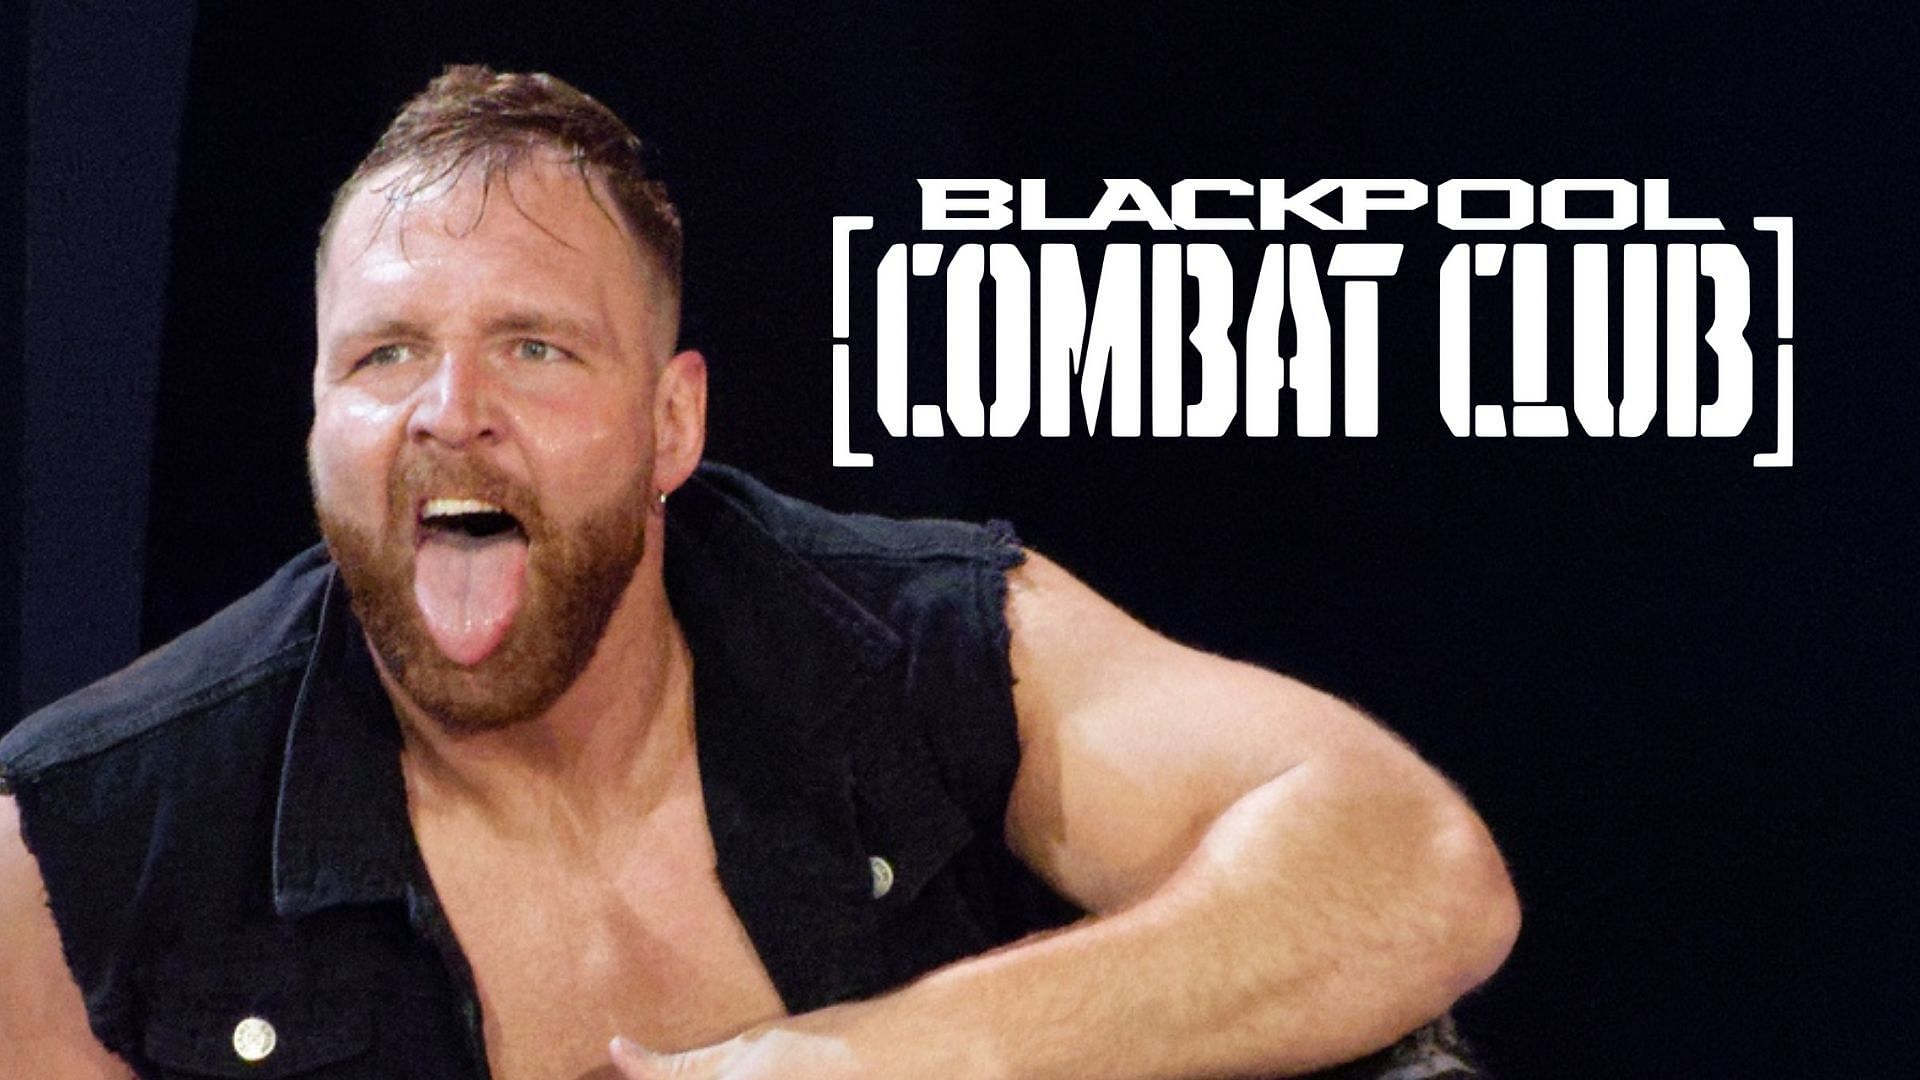 Could Jon Moxley leave the Blackpool Combat Club and form a new stable?